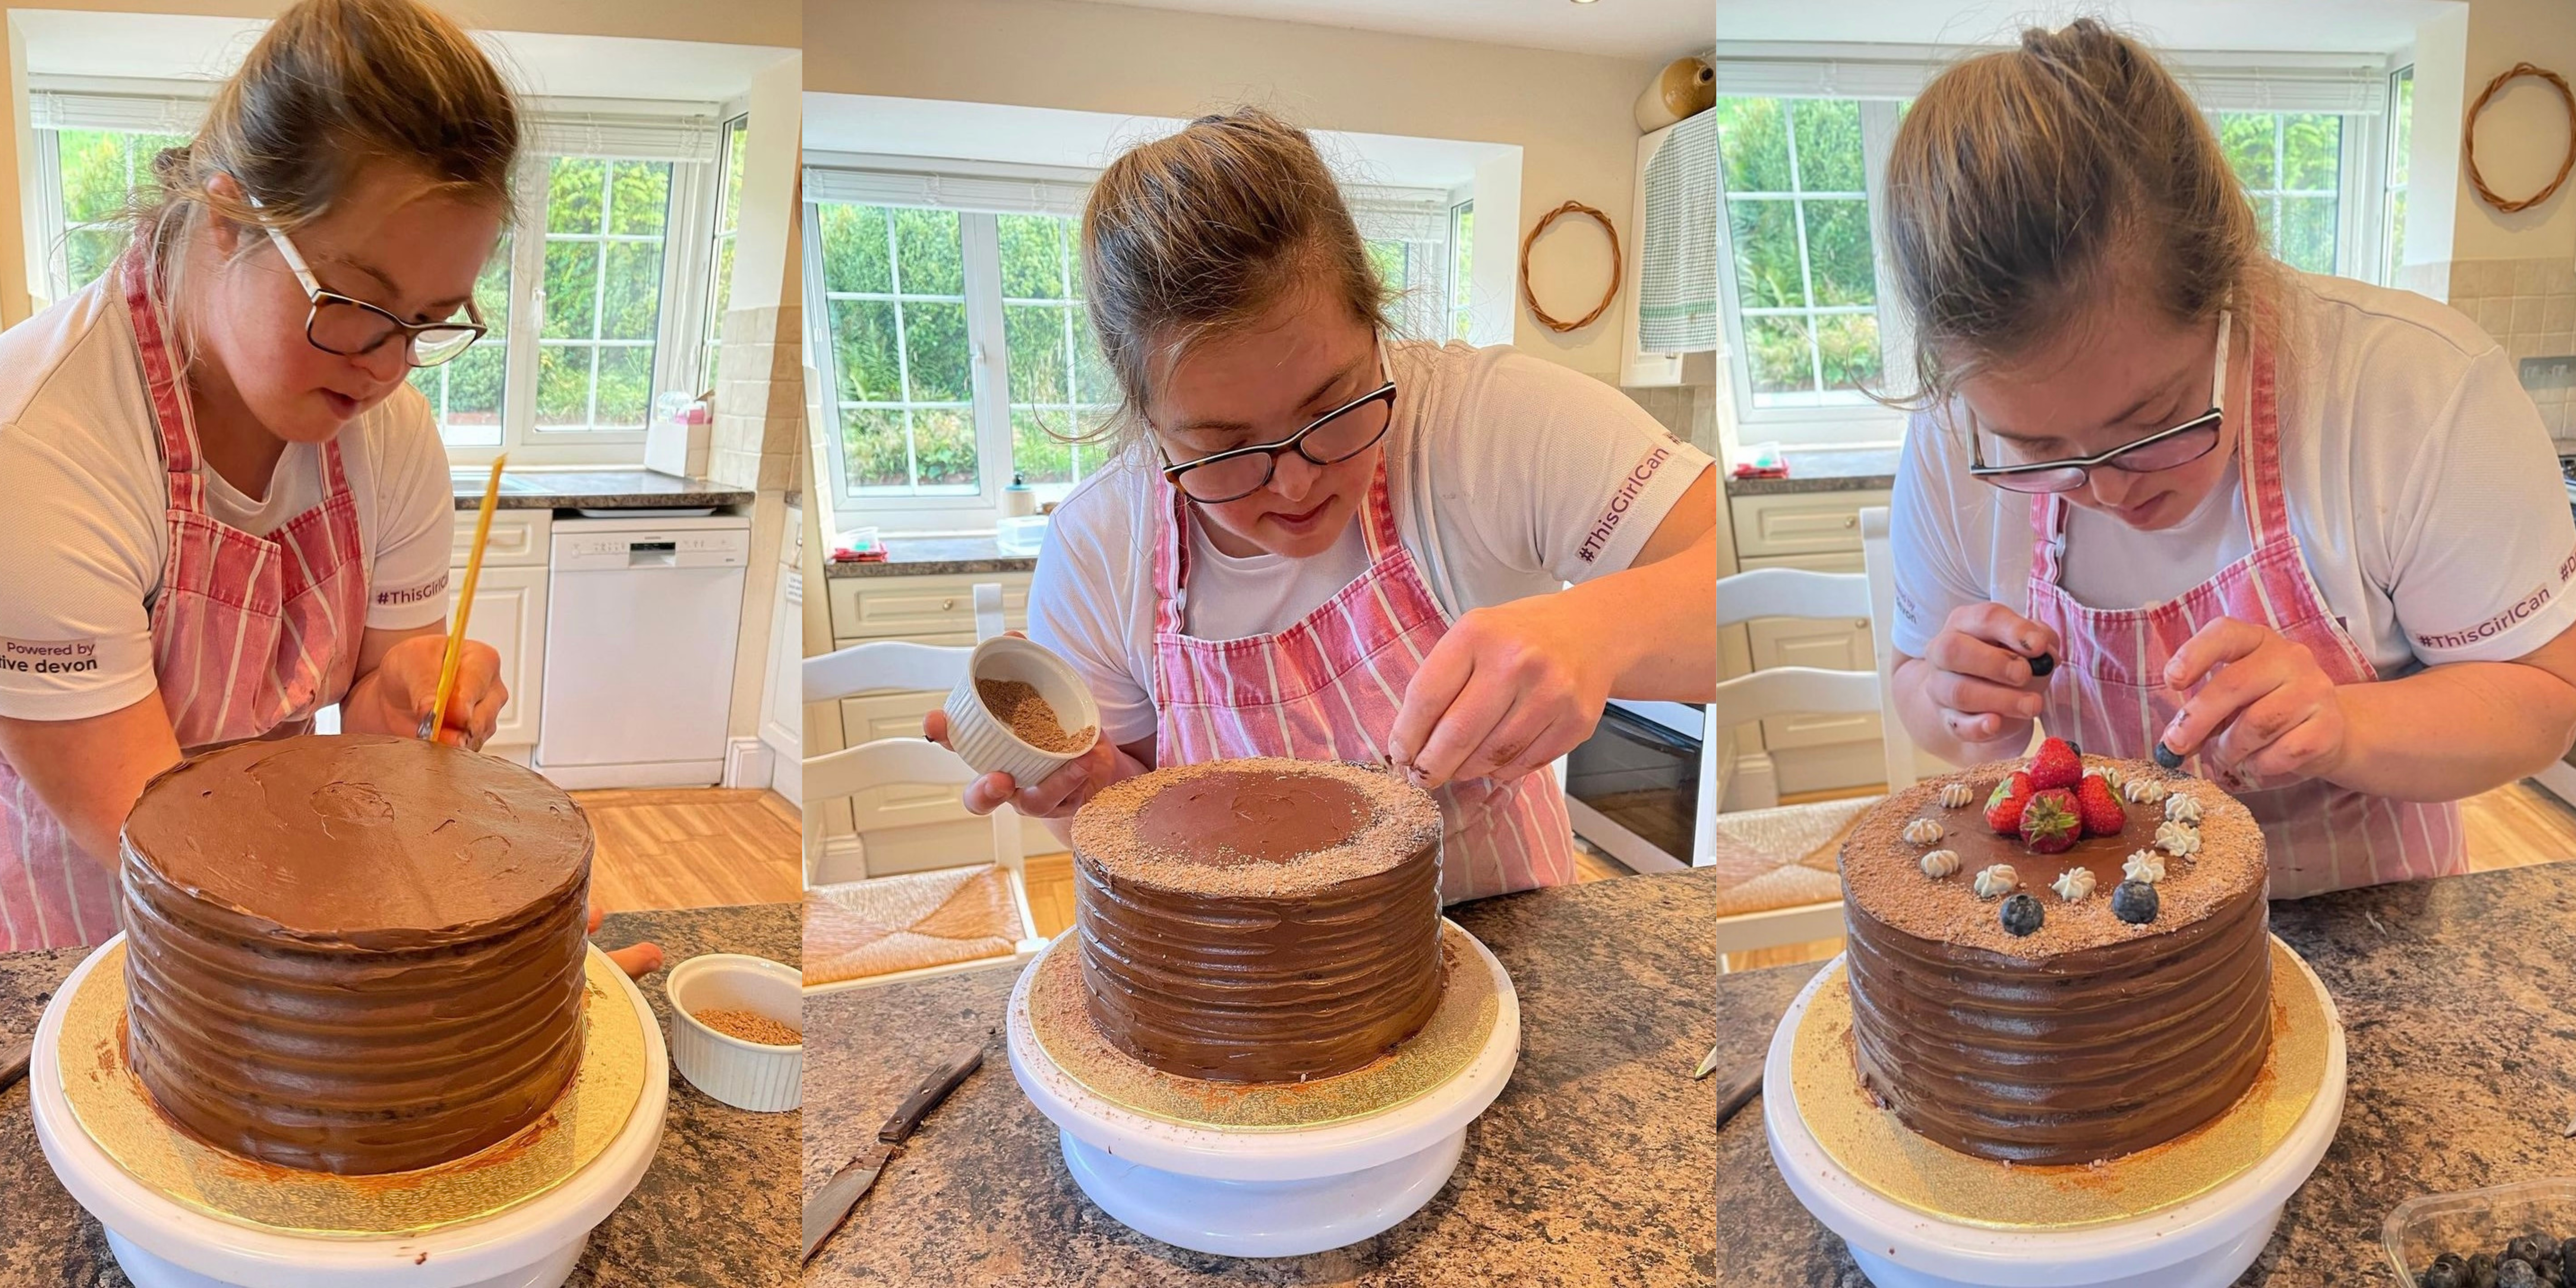 Collage of woman decorating a chocolate cake